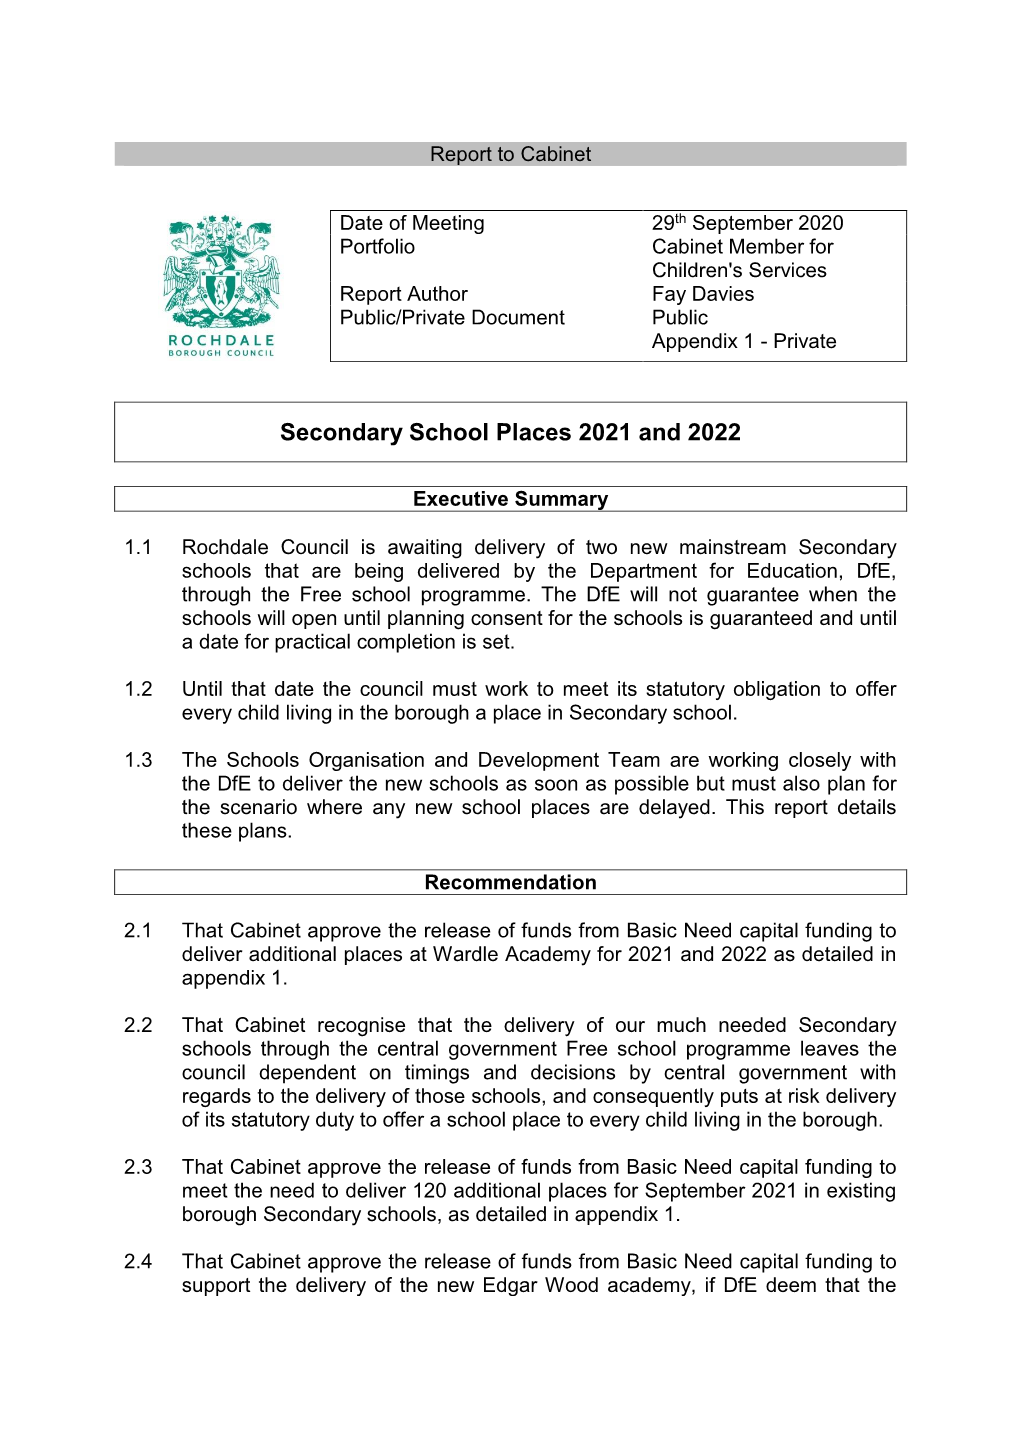 Secondary School Places 2021 and 2022